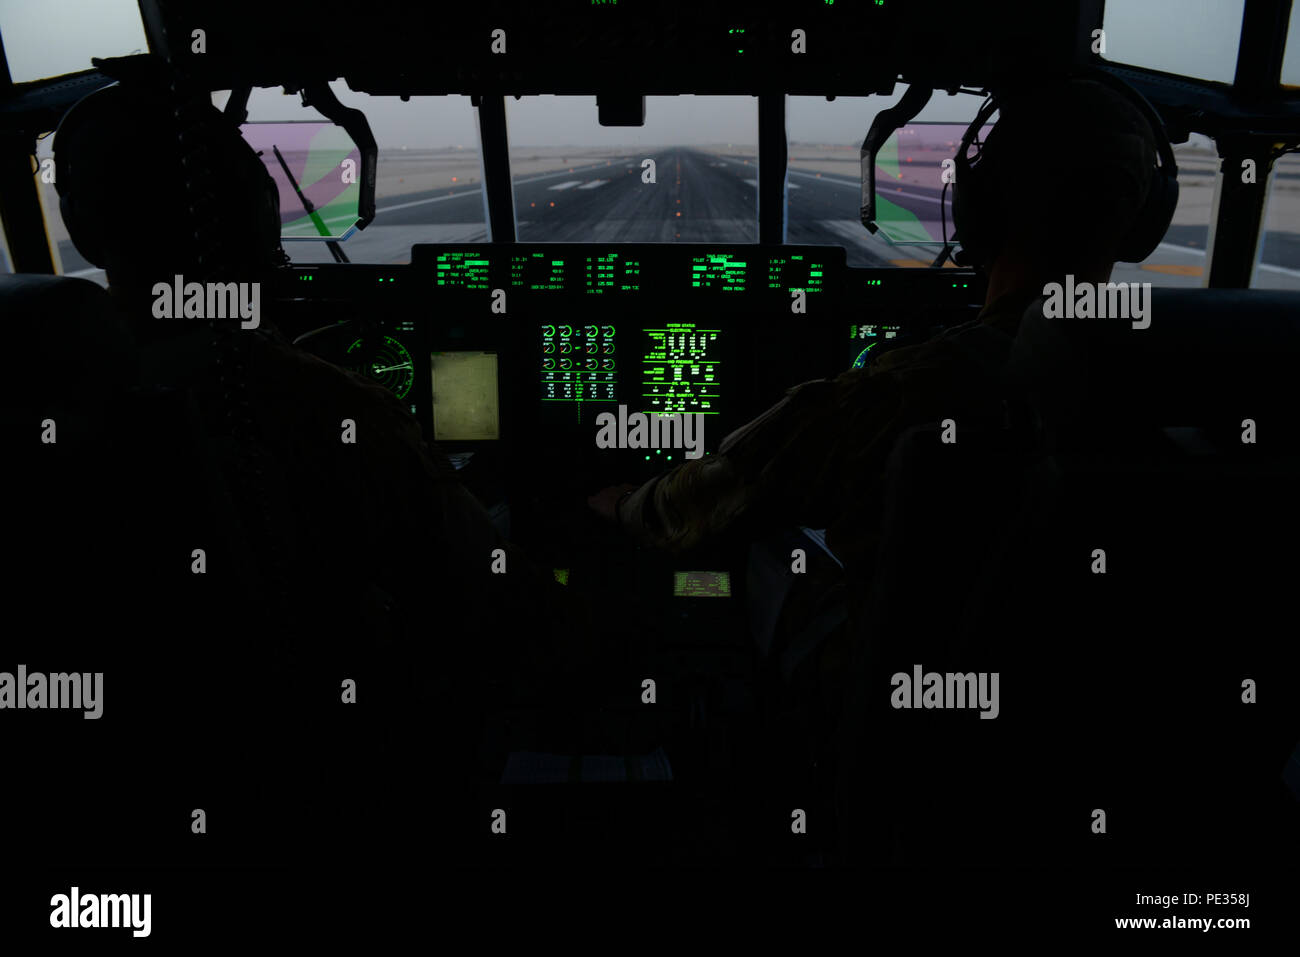 U.S. Air Force Capts. Boston McClain and Matt Buchholtz, 774th Expeditionary Airlift Squadron C-130J Super Hercules pilots, take-off for Bagram Air Field, Afghanistan, Sept. 3 2015, at Al Udeid Air Base, Qatar. The pilots, who are deployed from Little Rock Air Force Base, Ark., fly various combat missions throughout Afghanistan supporting missions ranging from medical evacuations to cargo and passenger transports. (U.S. Air Force photo by Senior Airman Cierra Presentado/Released) Stock Photo